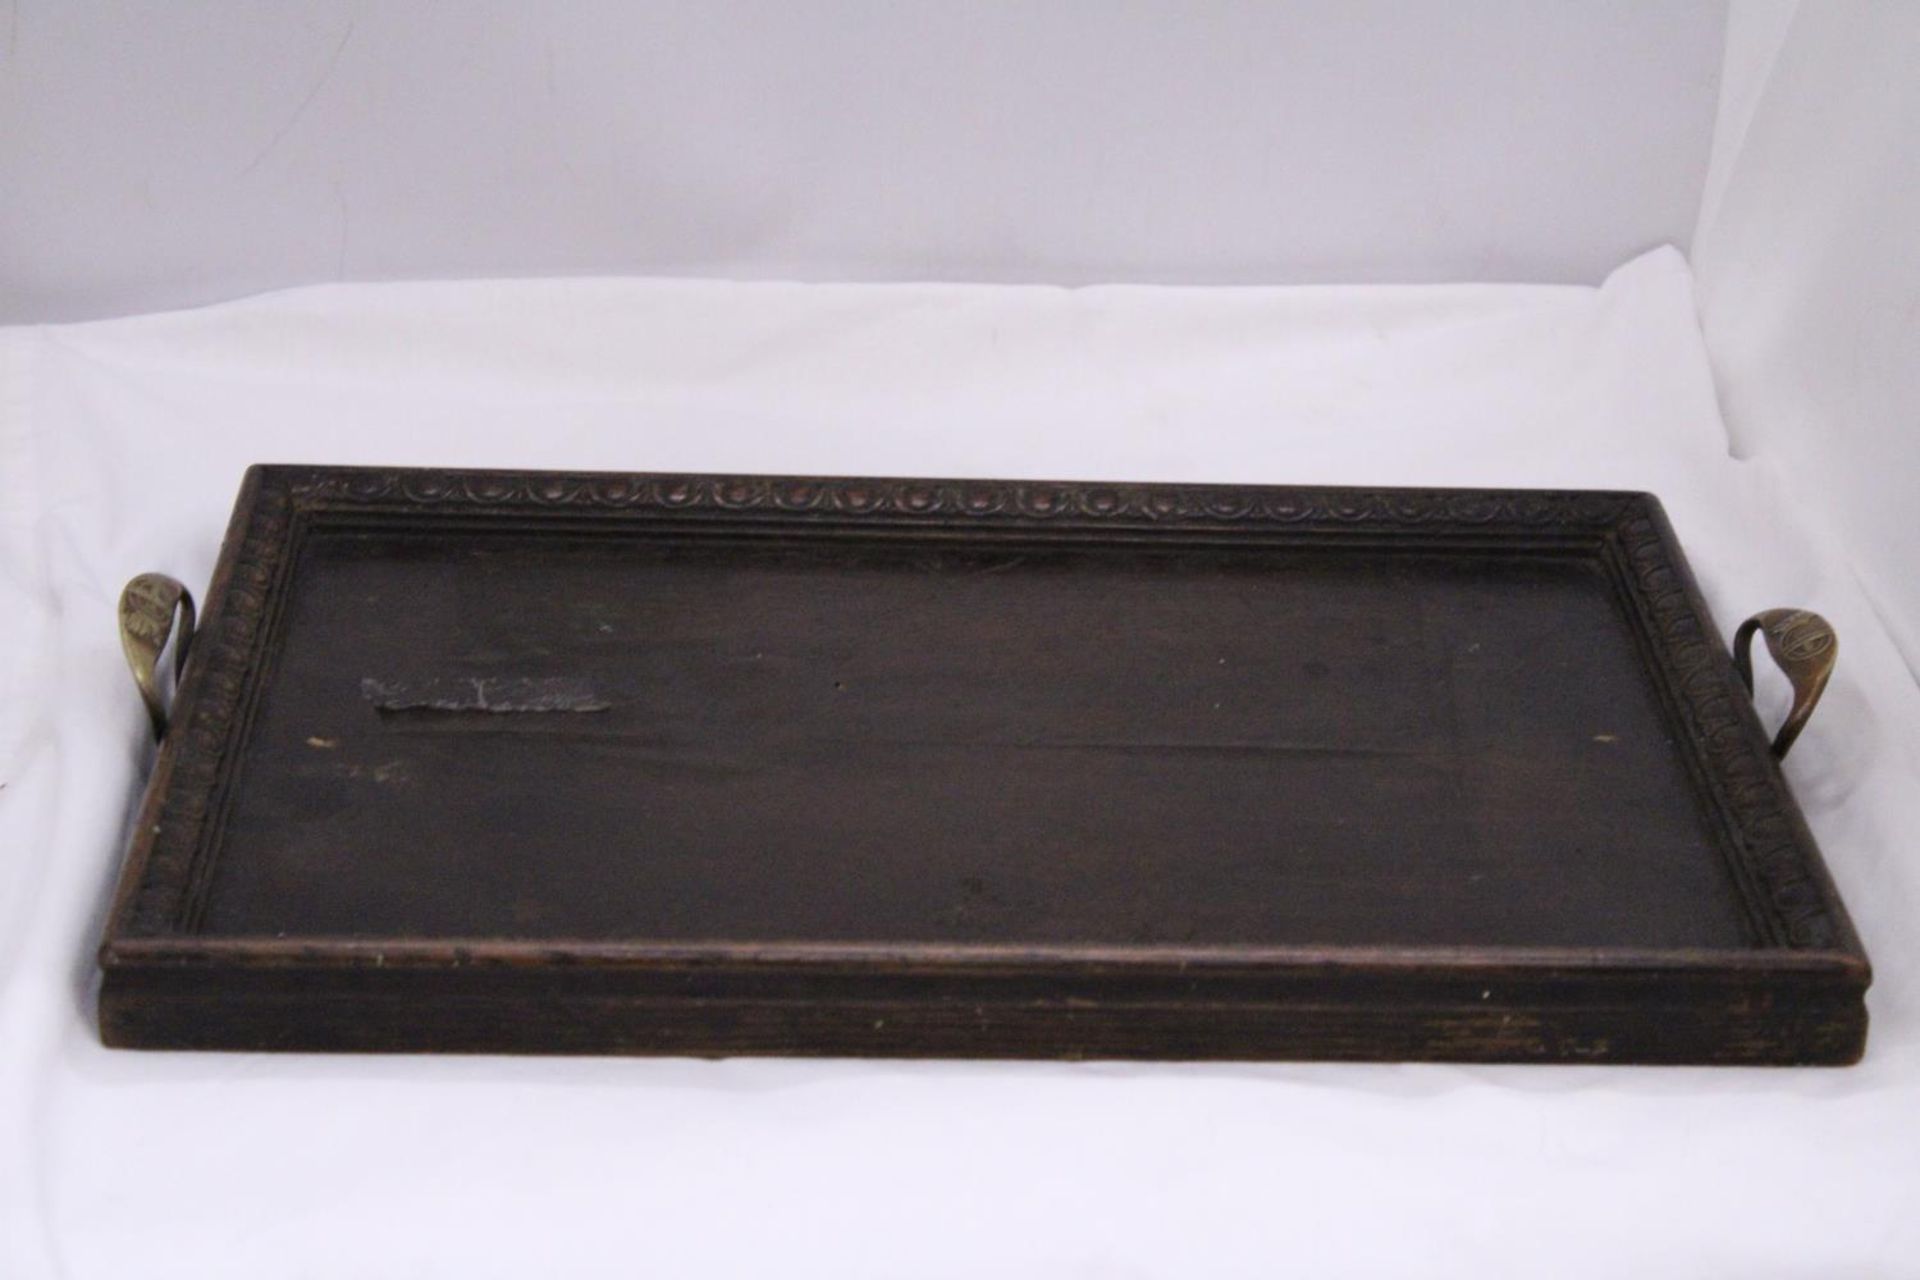 A WOODEN SERVING TRAY WITH METAL HANDLES MARKED - ST DUNSTANS - Image 5 of 5